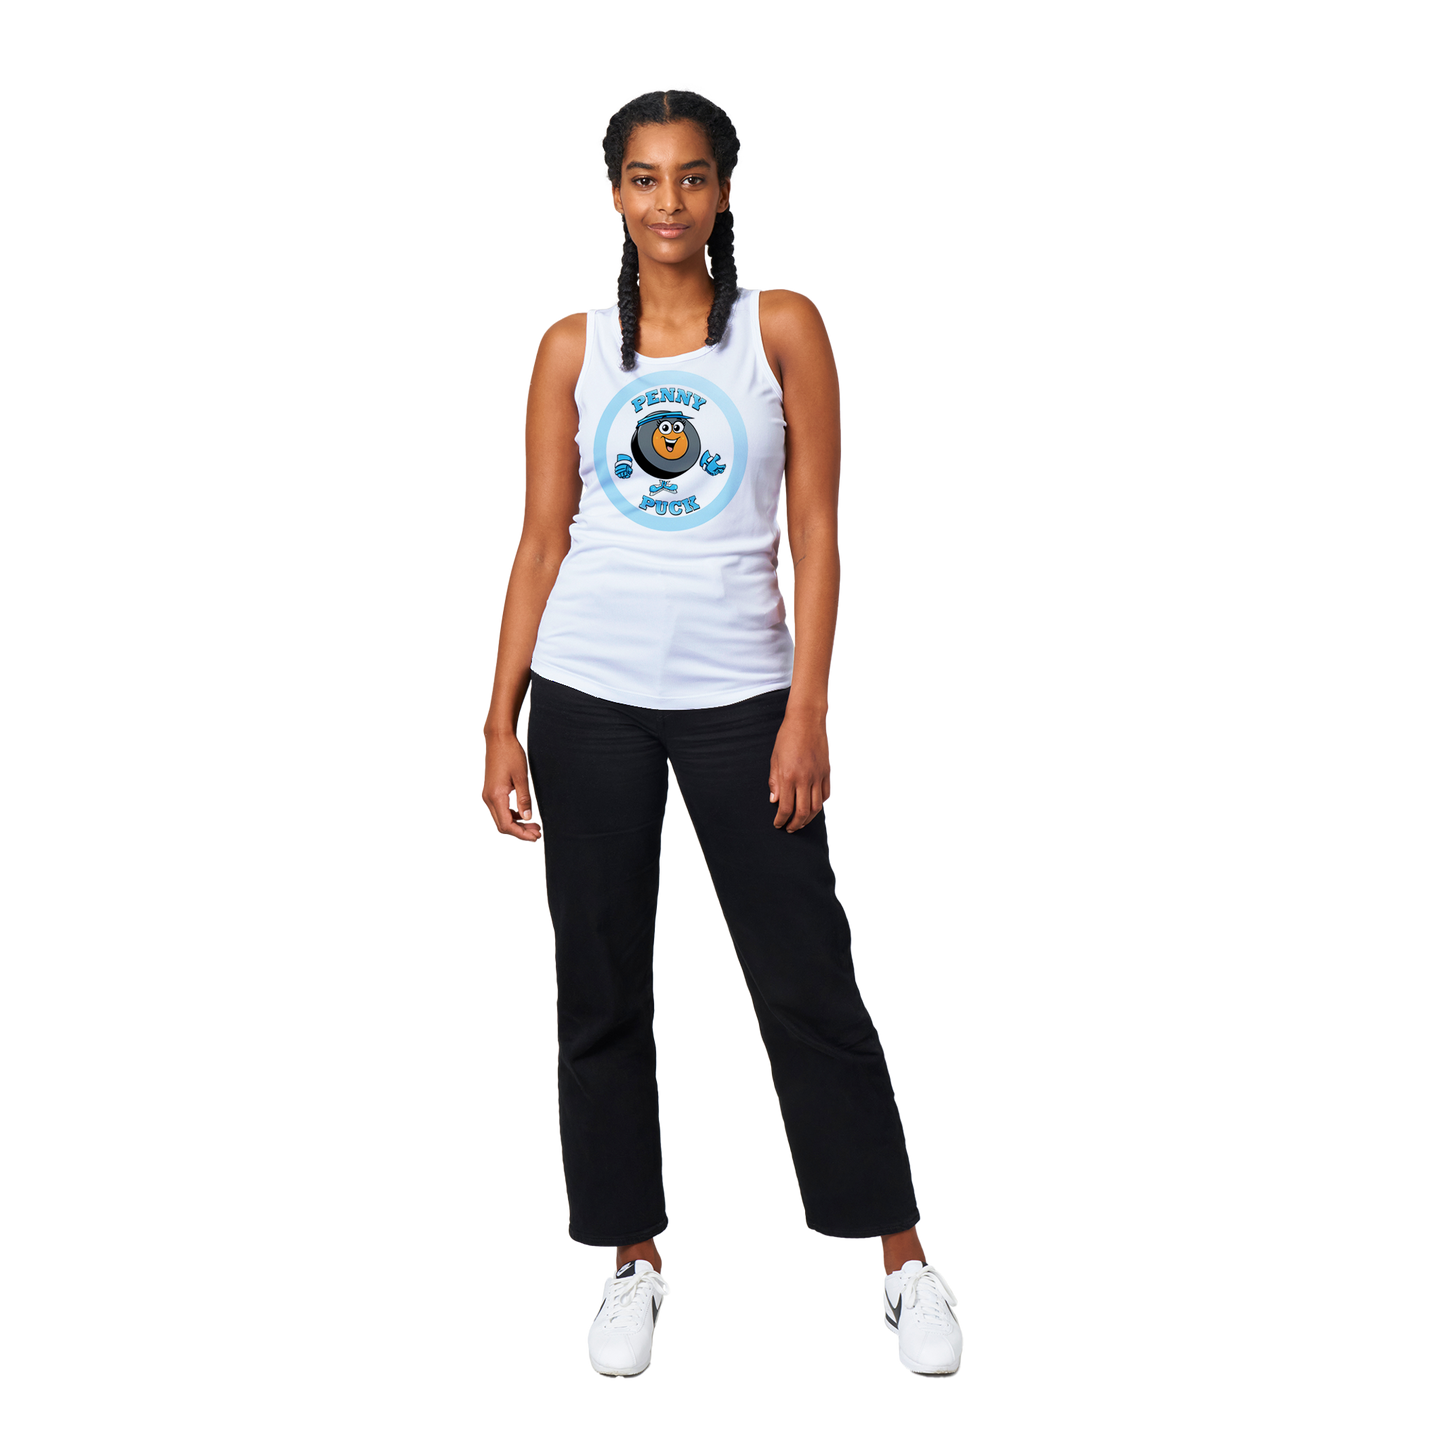 Penny Puck Pose Performance Women's Tank Top